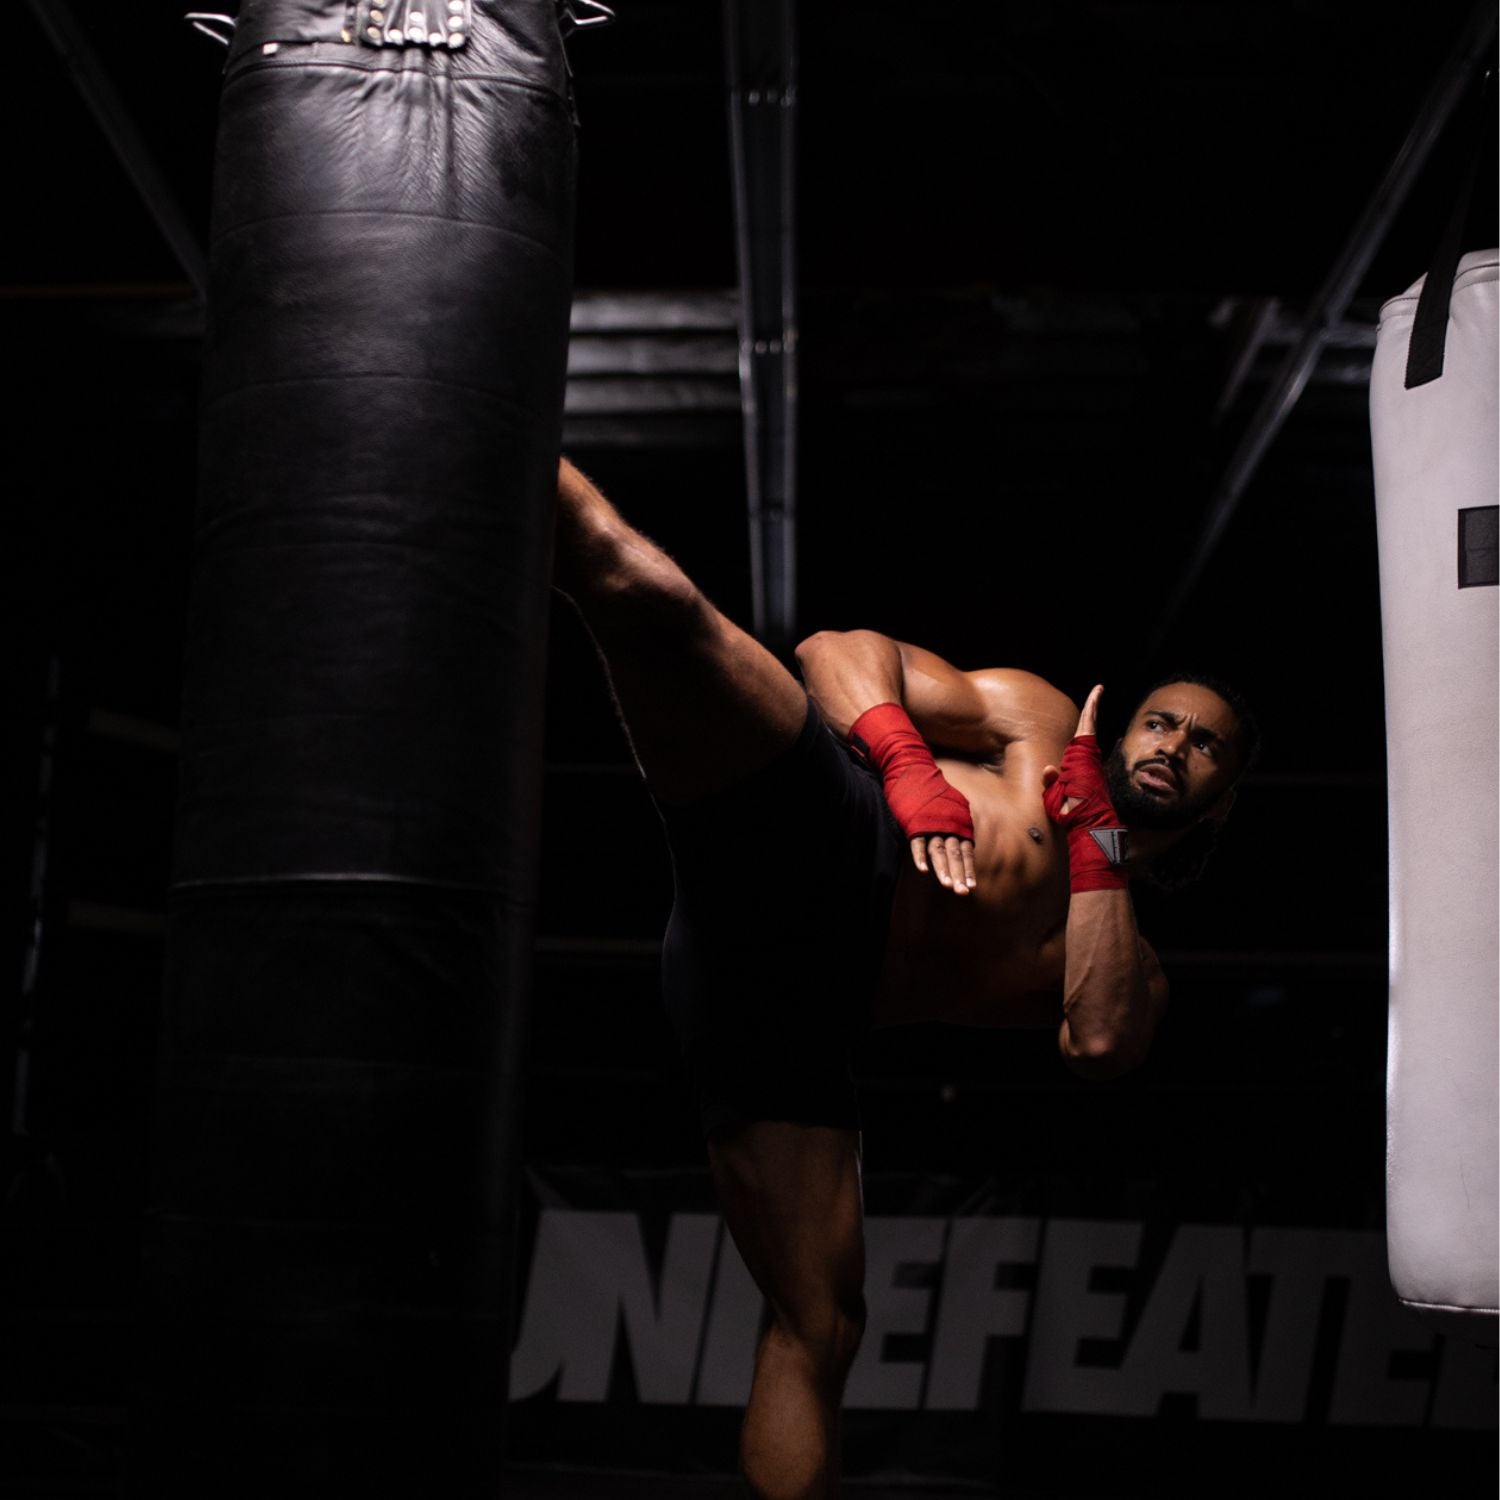 Very fit kickboxer high-kicking a heavy bag in a dark gym 